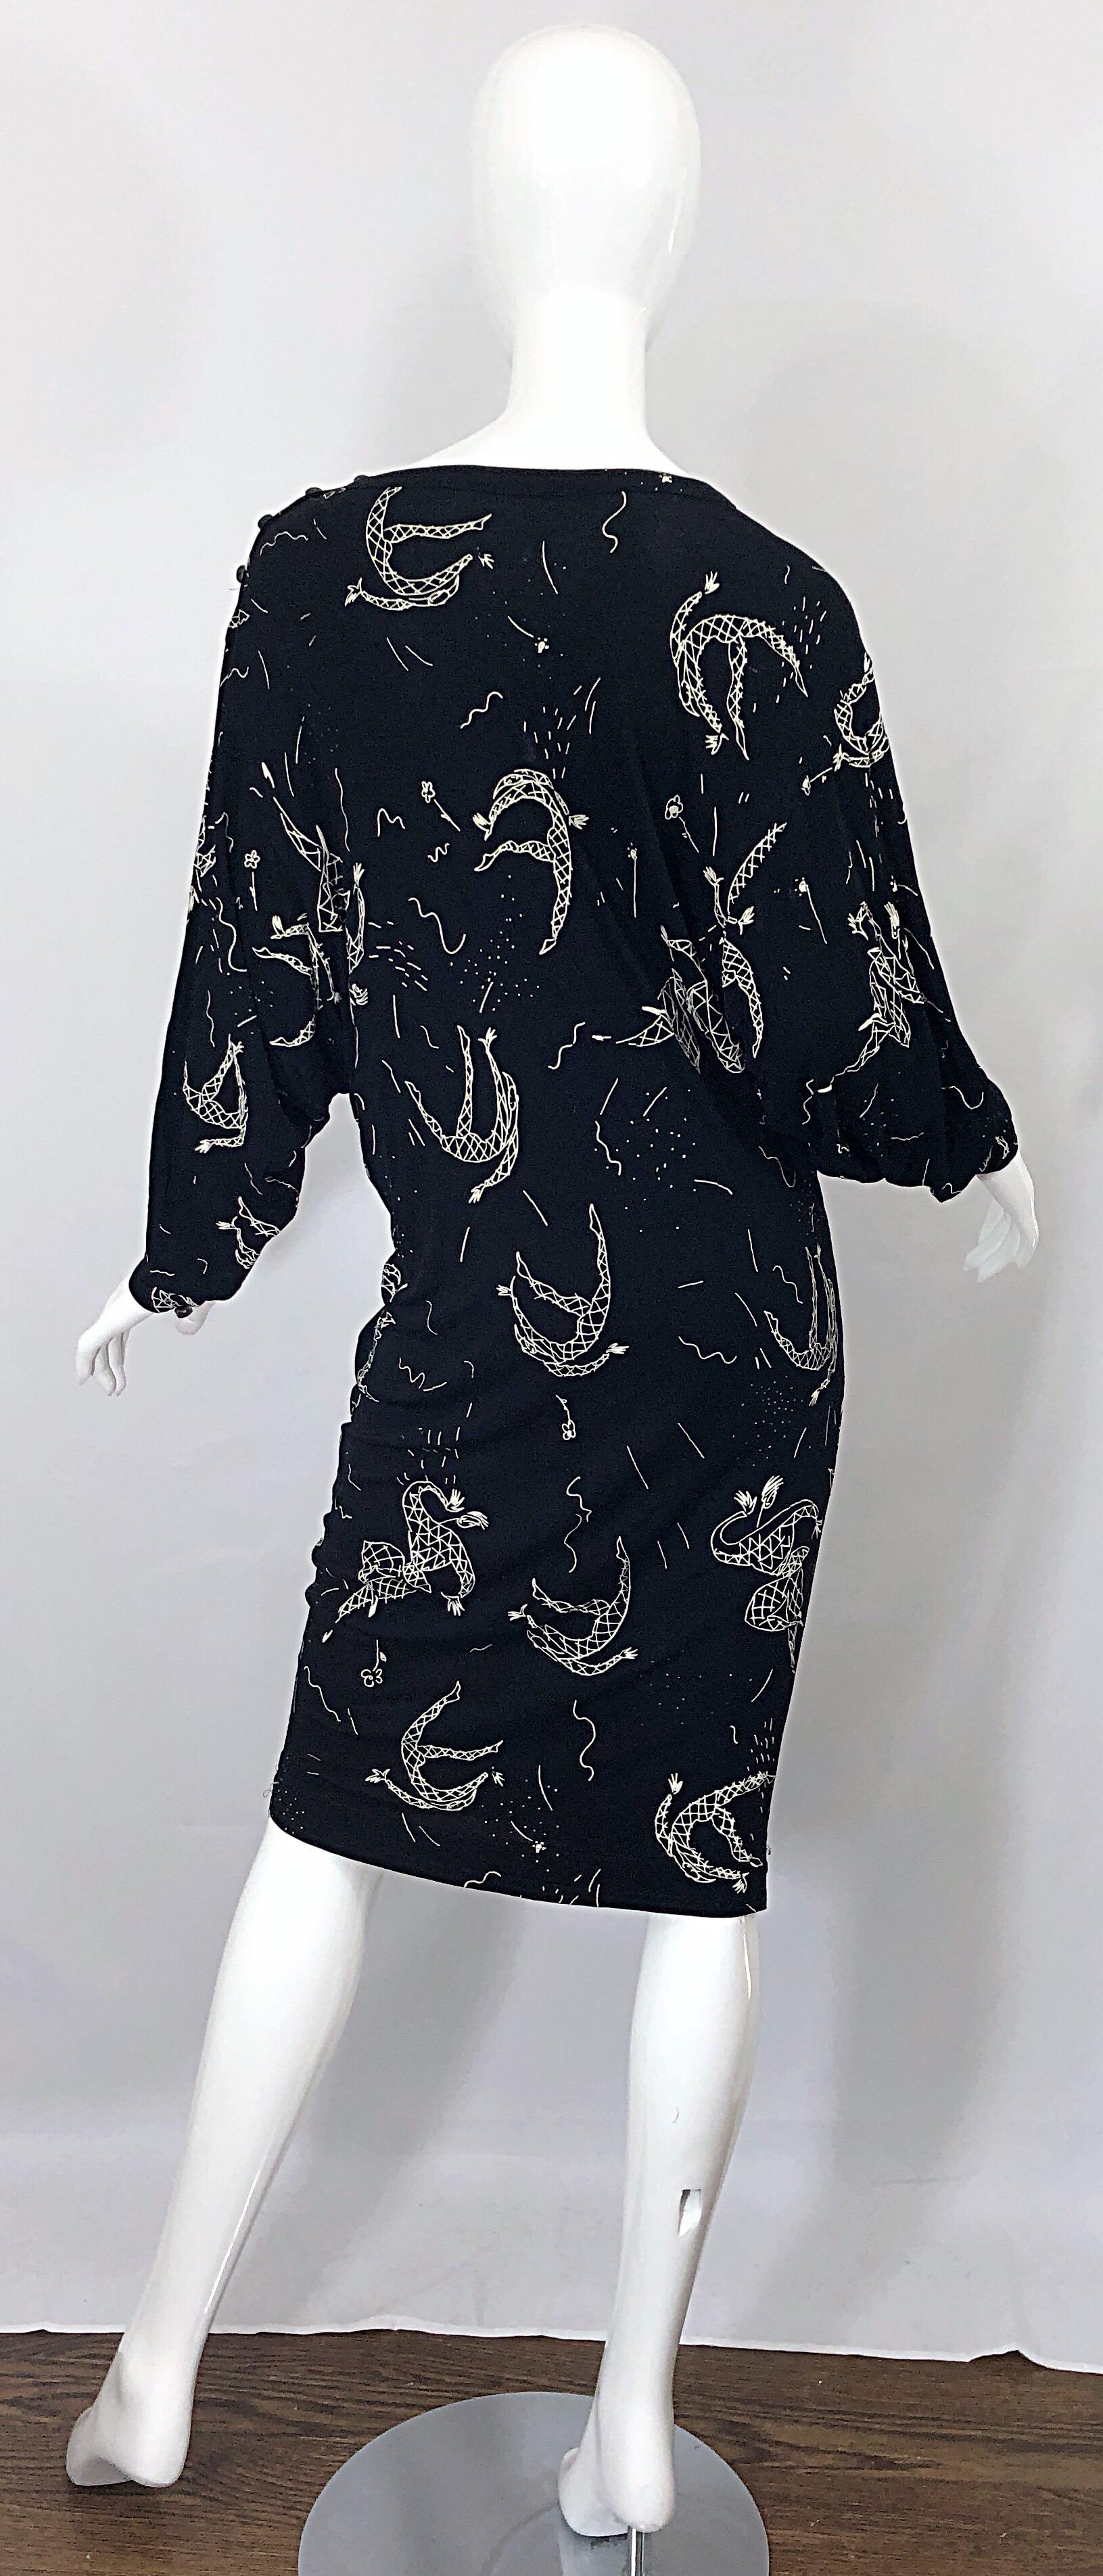 Amen Wardy 1980s Hand Painted Novelty Harlequin Print Black and White 80s Dress In Excellent Condition For Sale In San Diego, CA